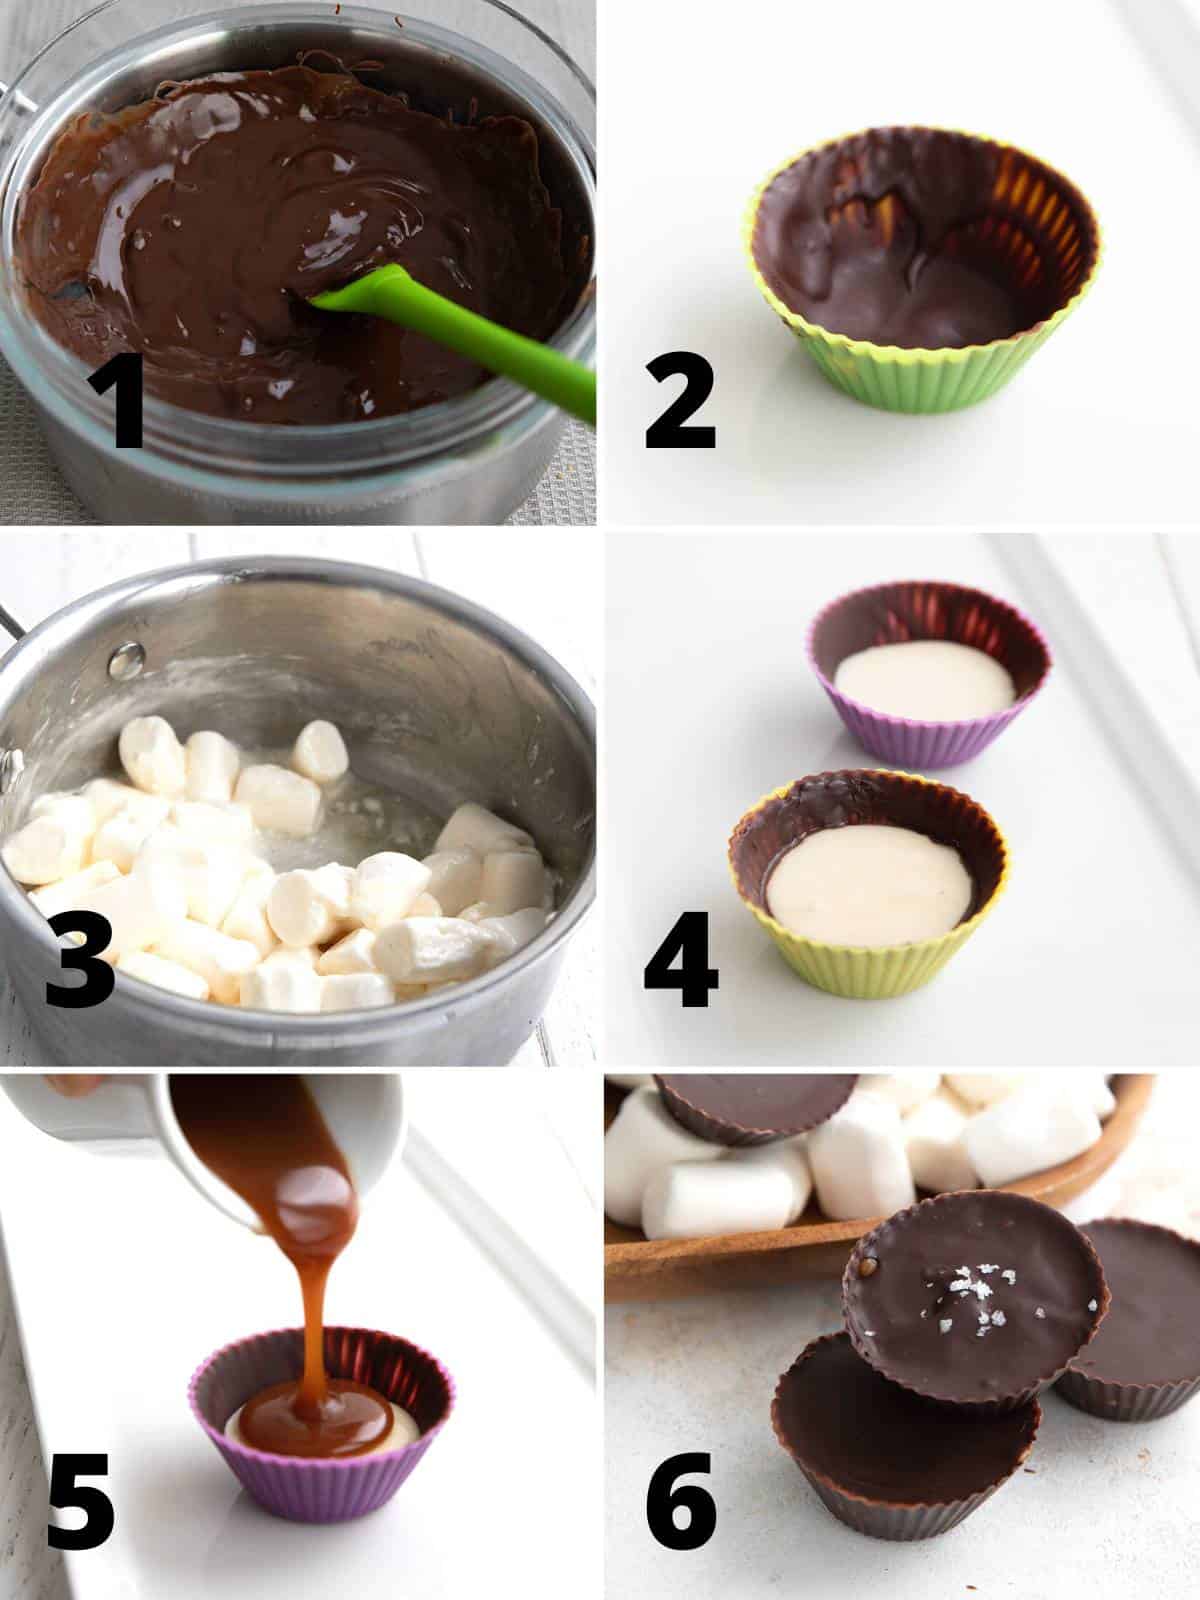 A collage of 6 images showing how to make Keto Mallow Cups.